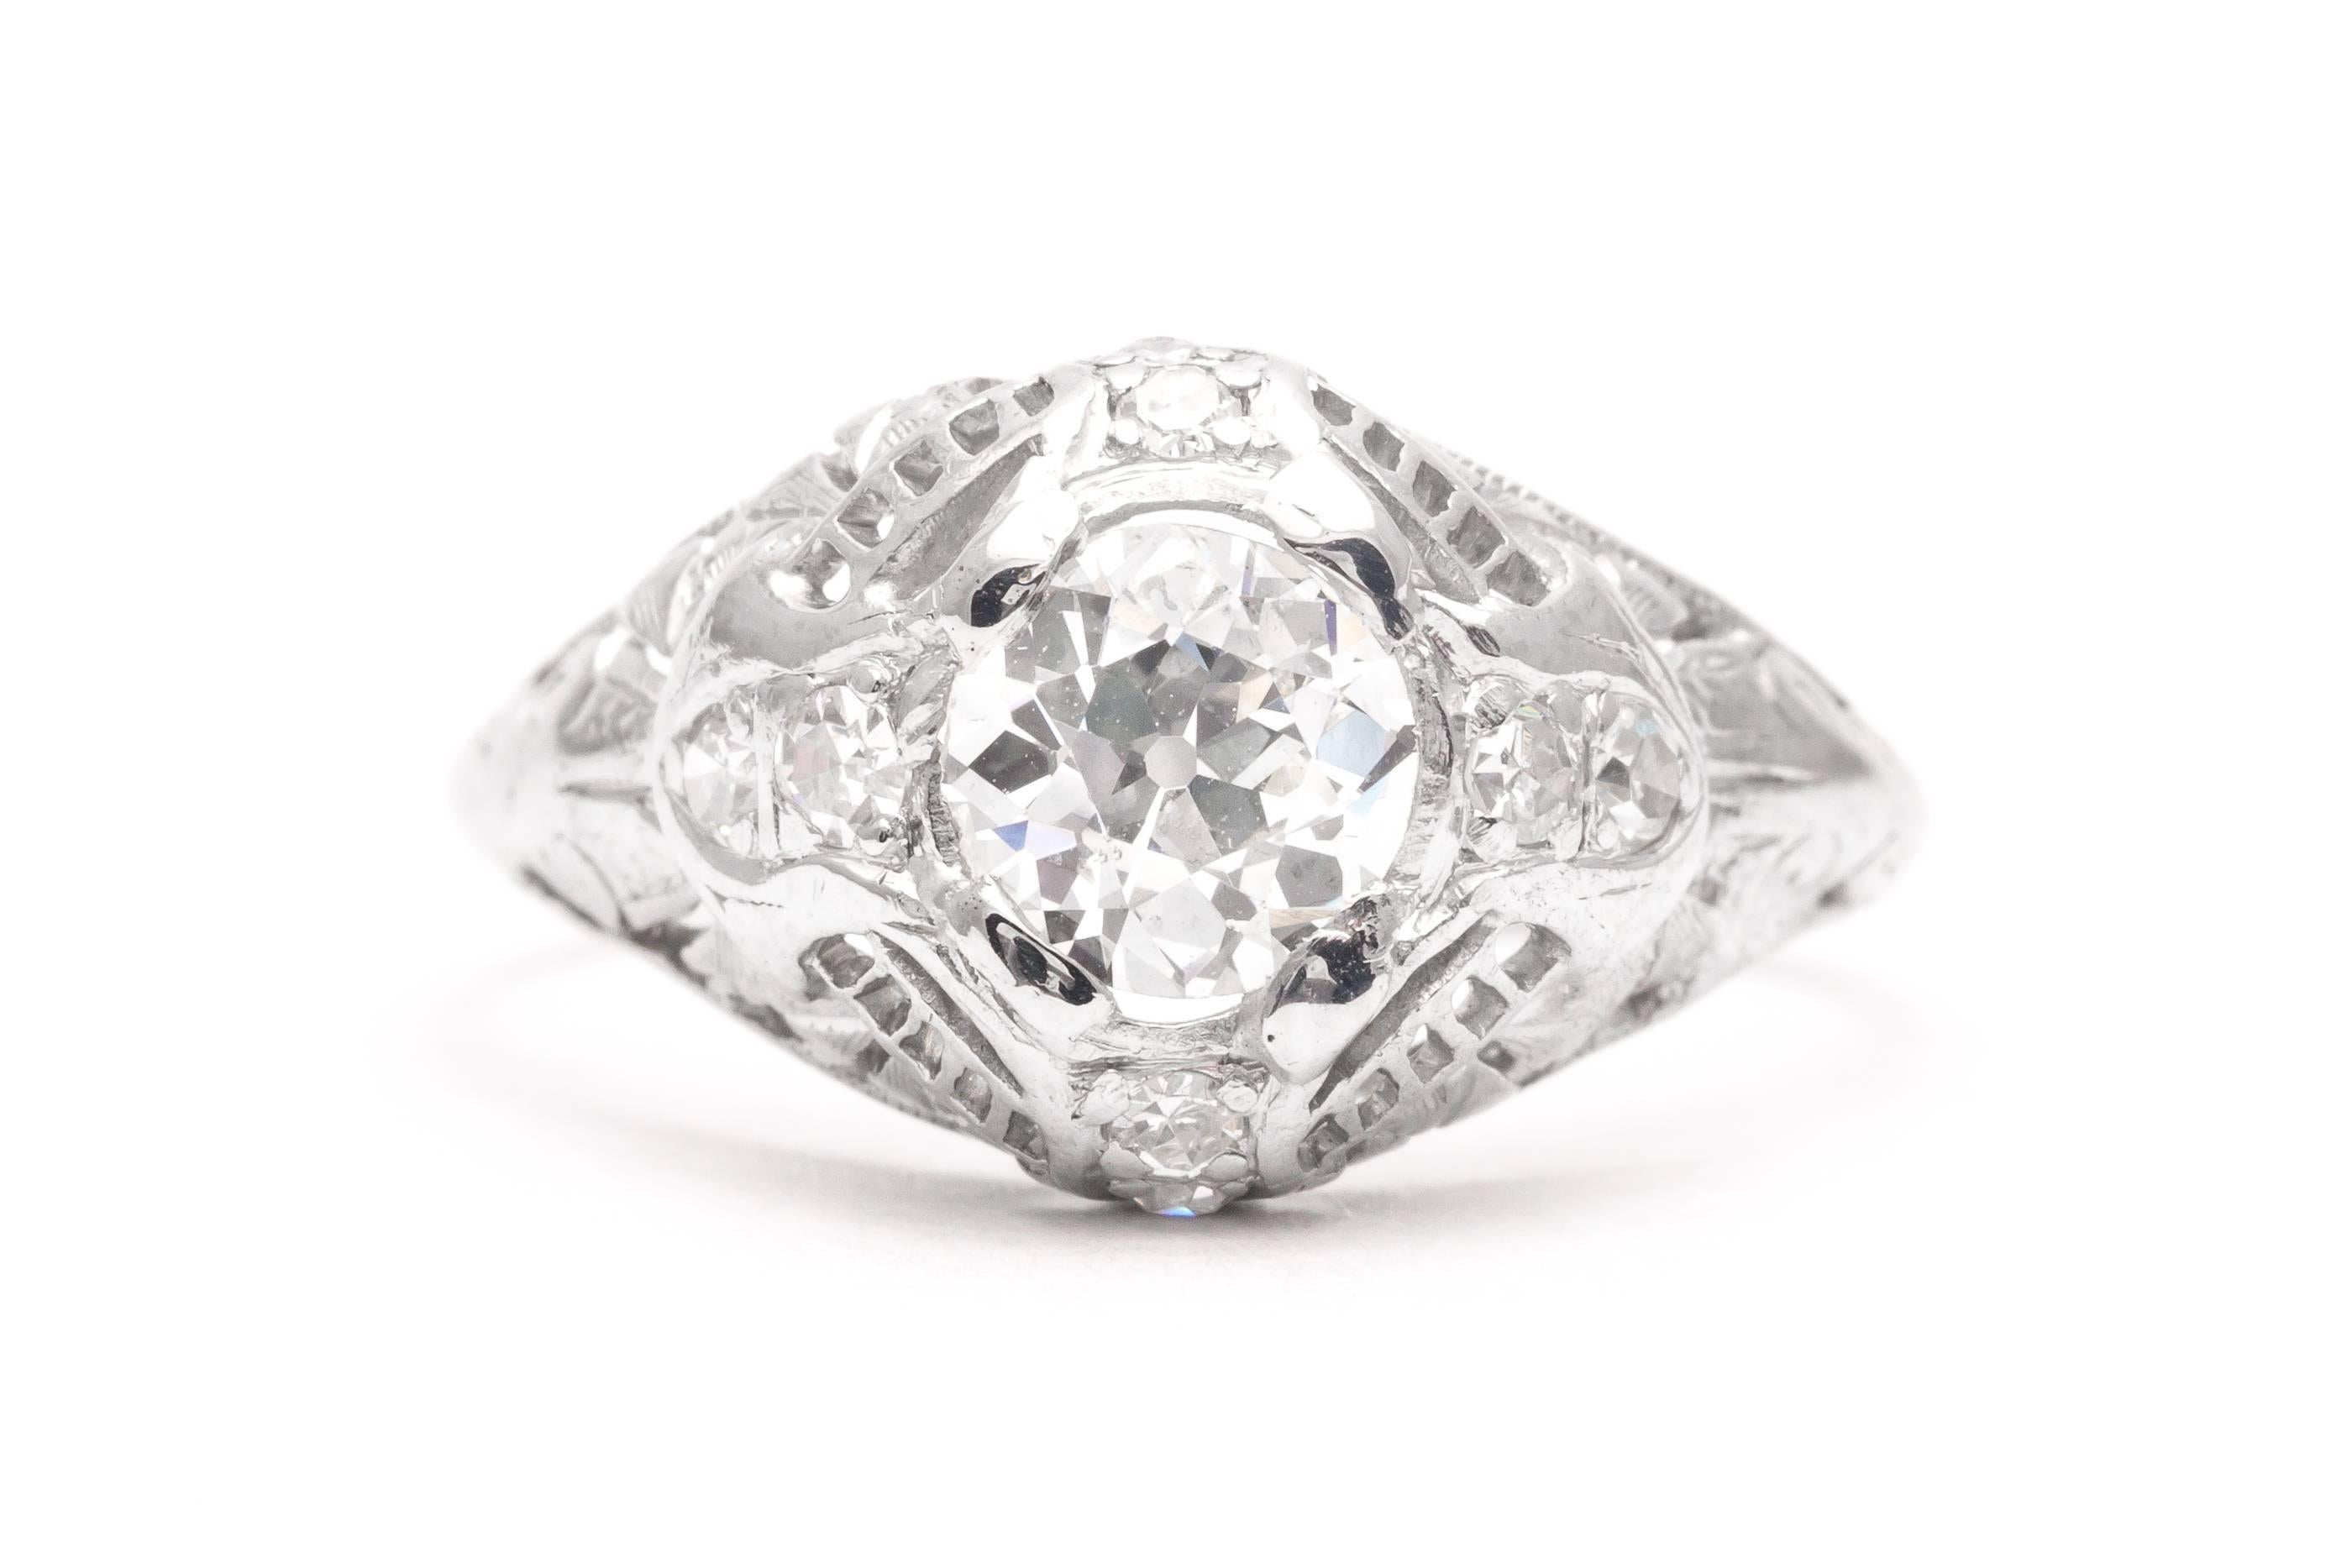 A beautiful original art deco period diamond engagement ring in luxurious platinum. Centered by a sparkling old European cut diamond weighing 0.75 carats, this ring features a total of eight pave set accenting diamonds.

Secured by four brightly